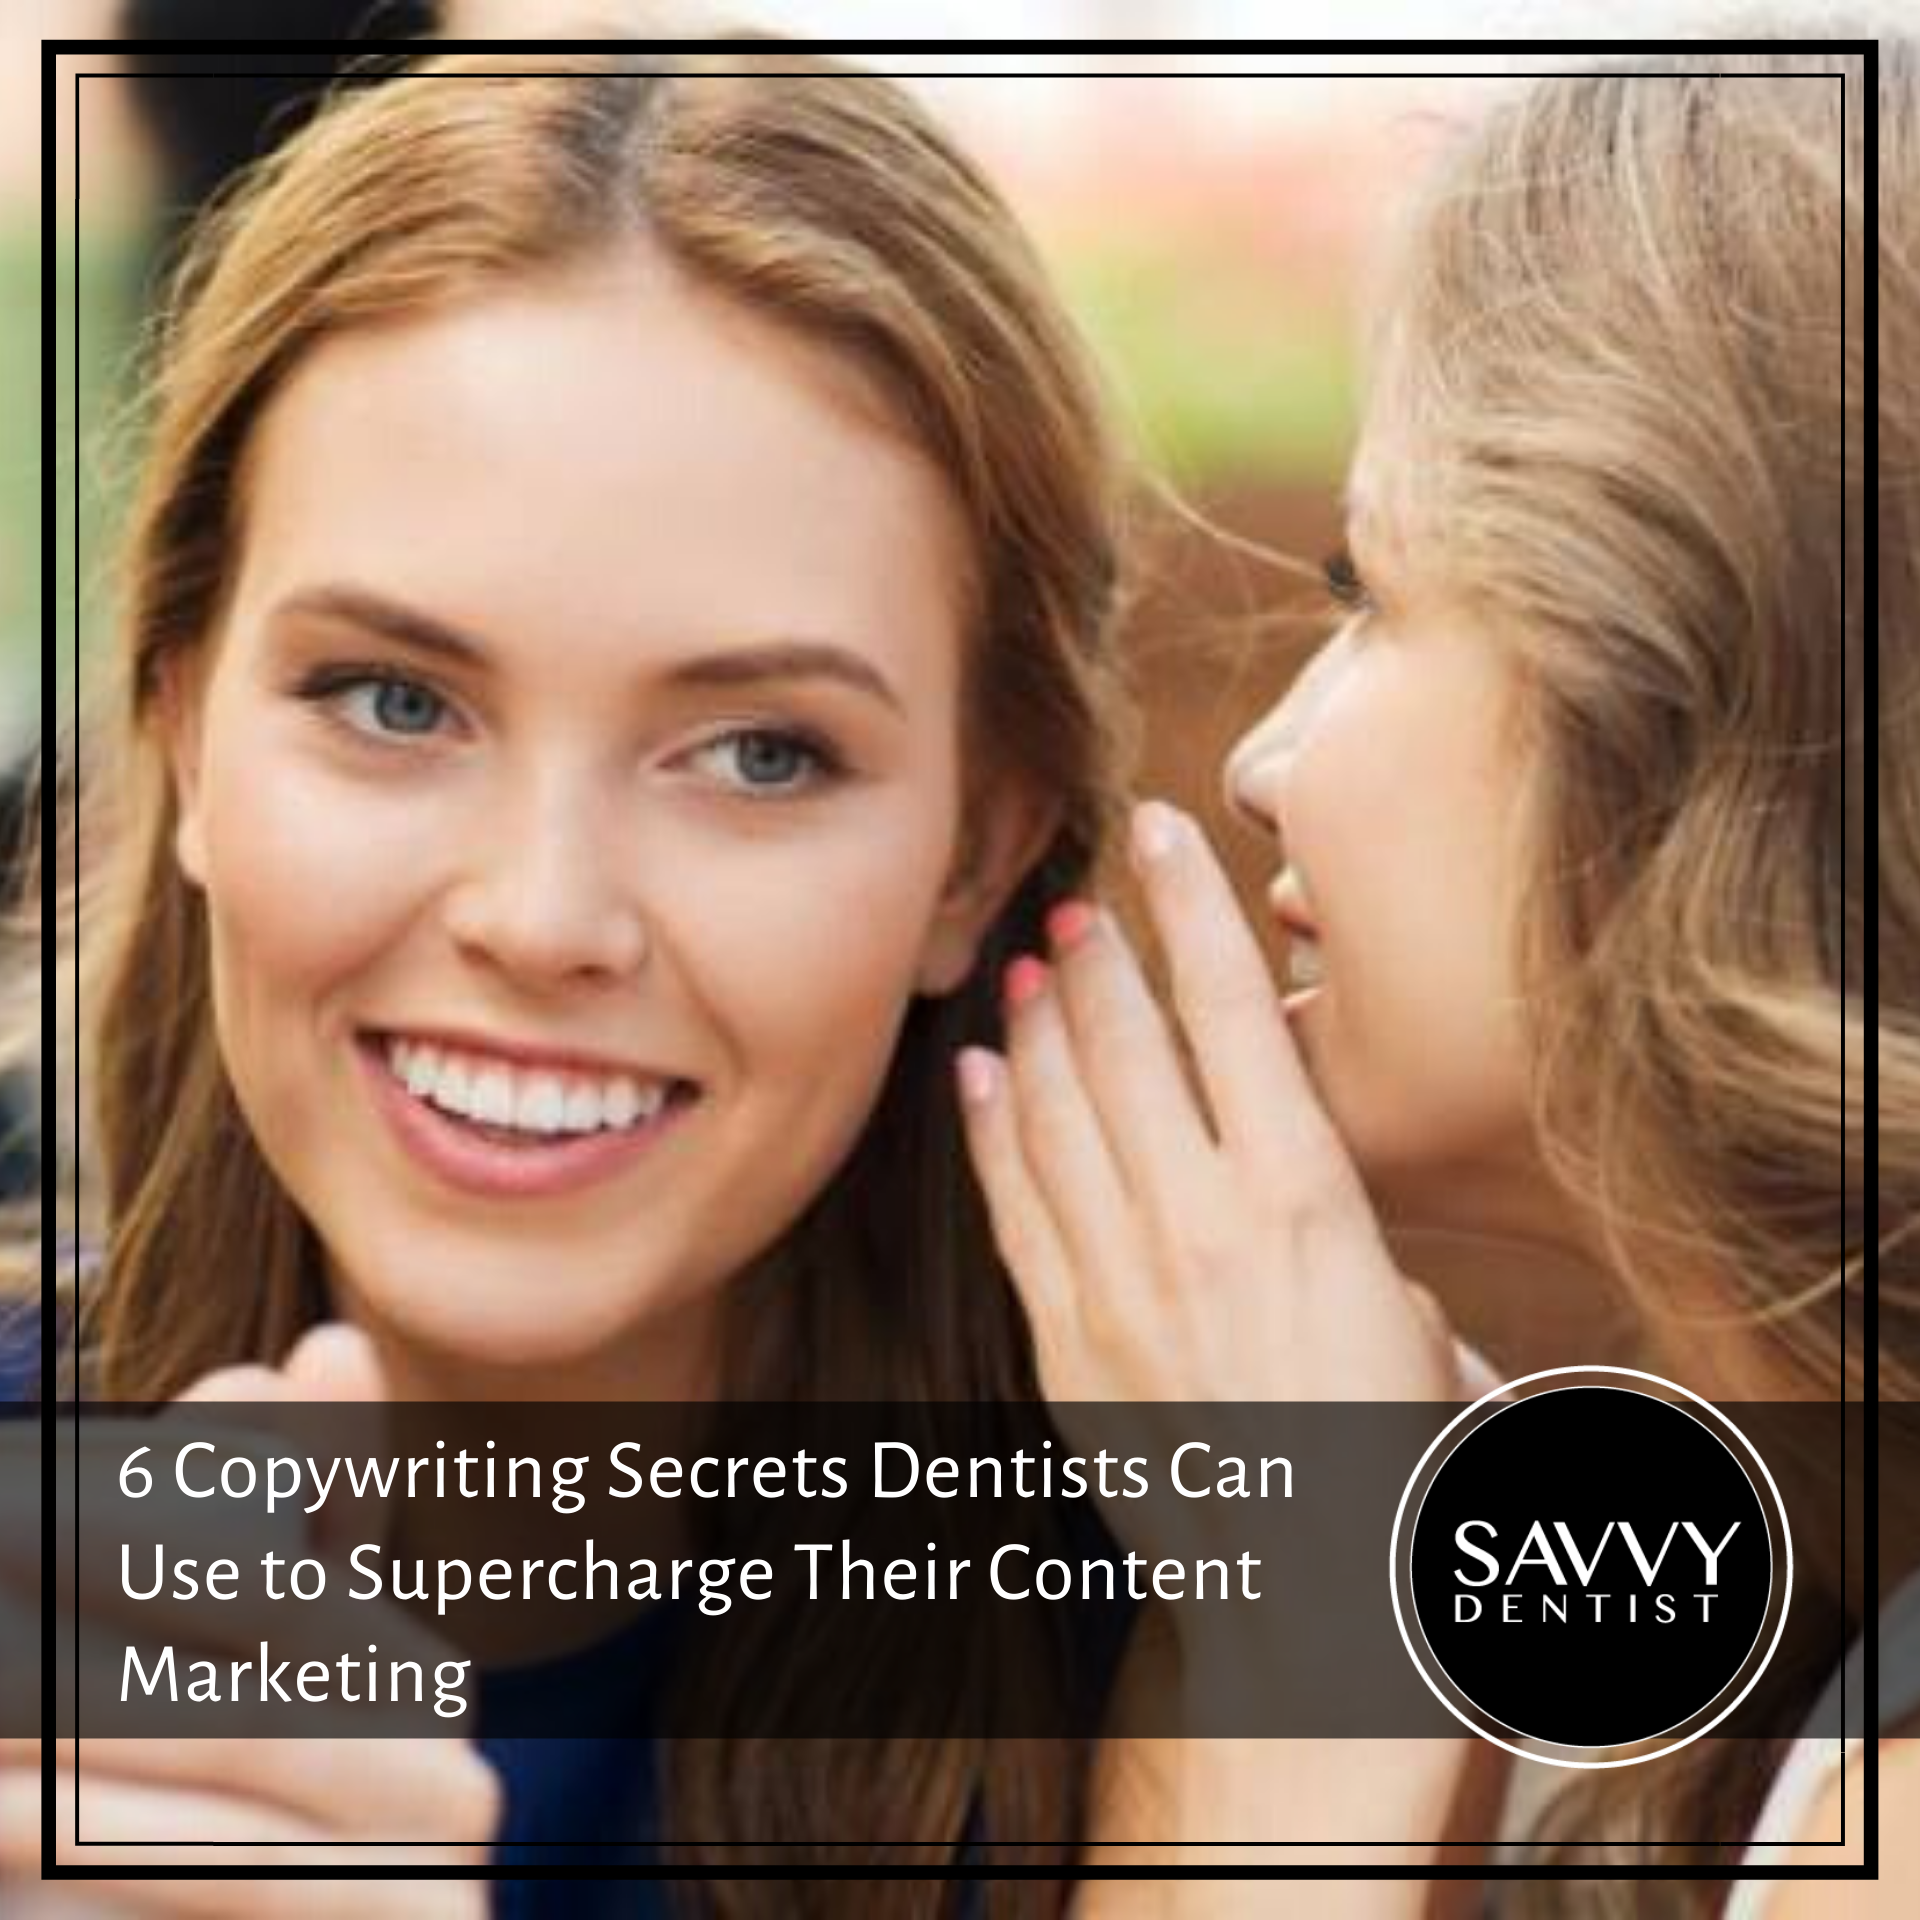 6 Copywriting Secrets Dentists Can Use to Supercharge Their Content Marketing